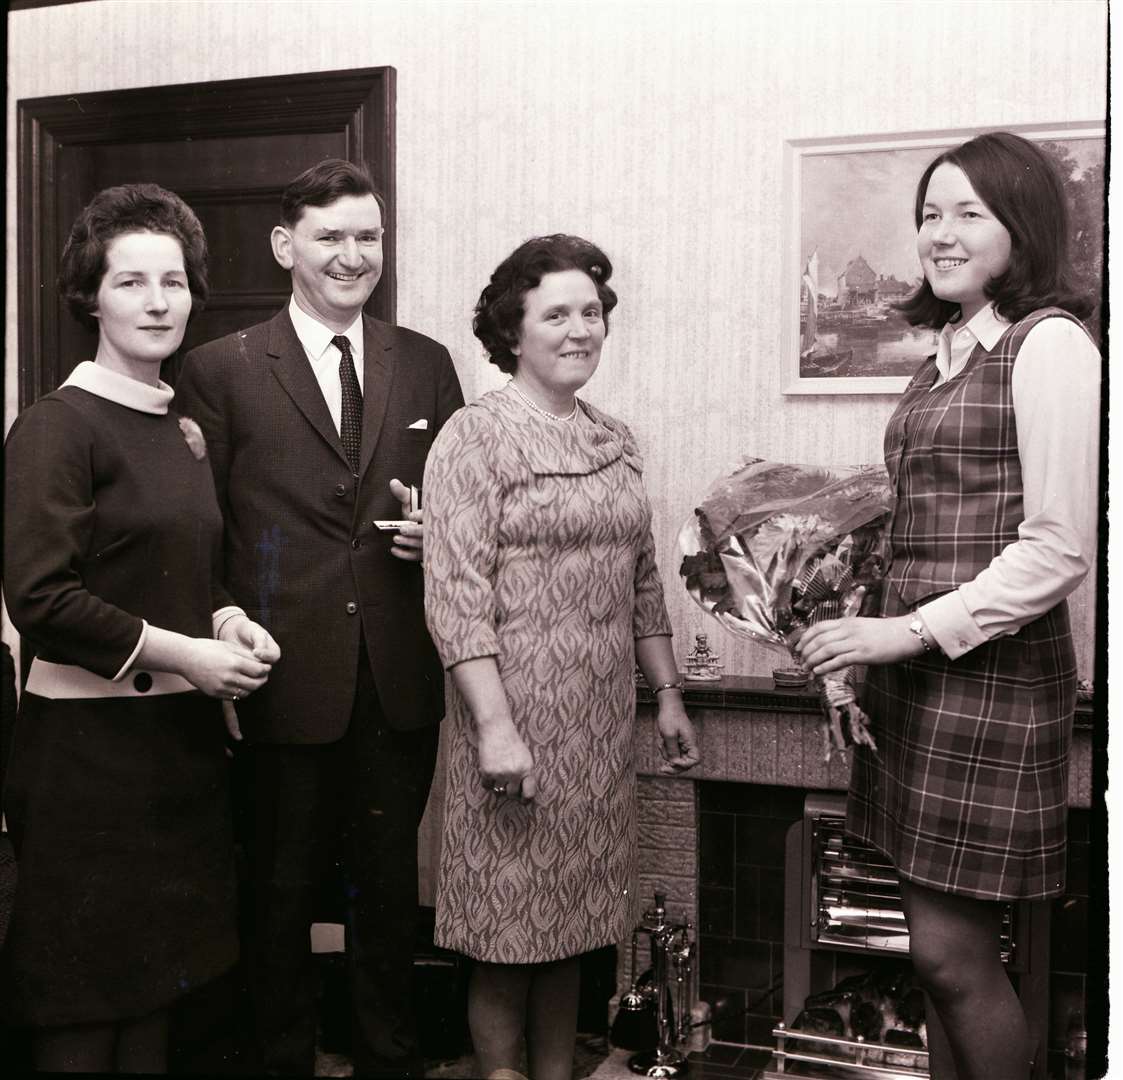 Nan Morrow is presented with flowers at Buckie Clydesdale Bank on the occasion of her husband, who is looking on, taking up the manager's post at the Lossiemouth branch on 1969.